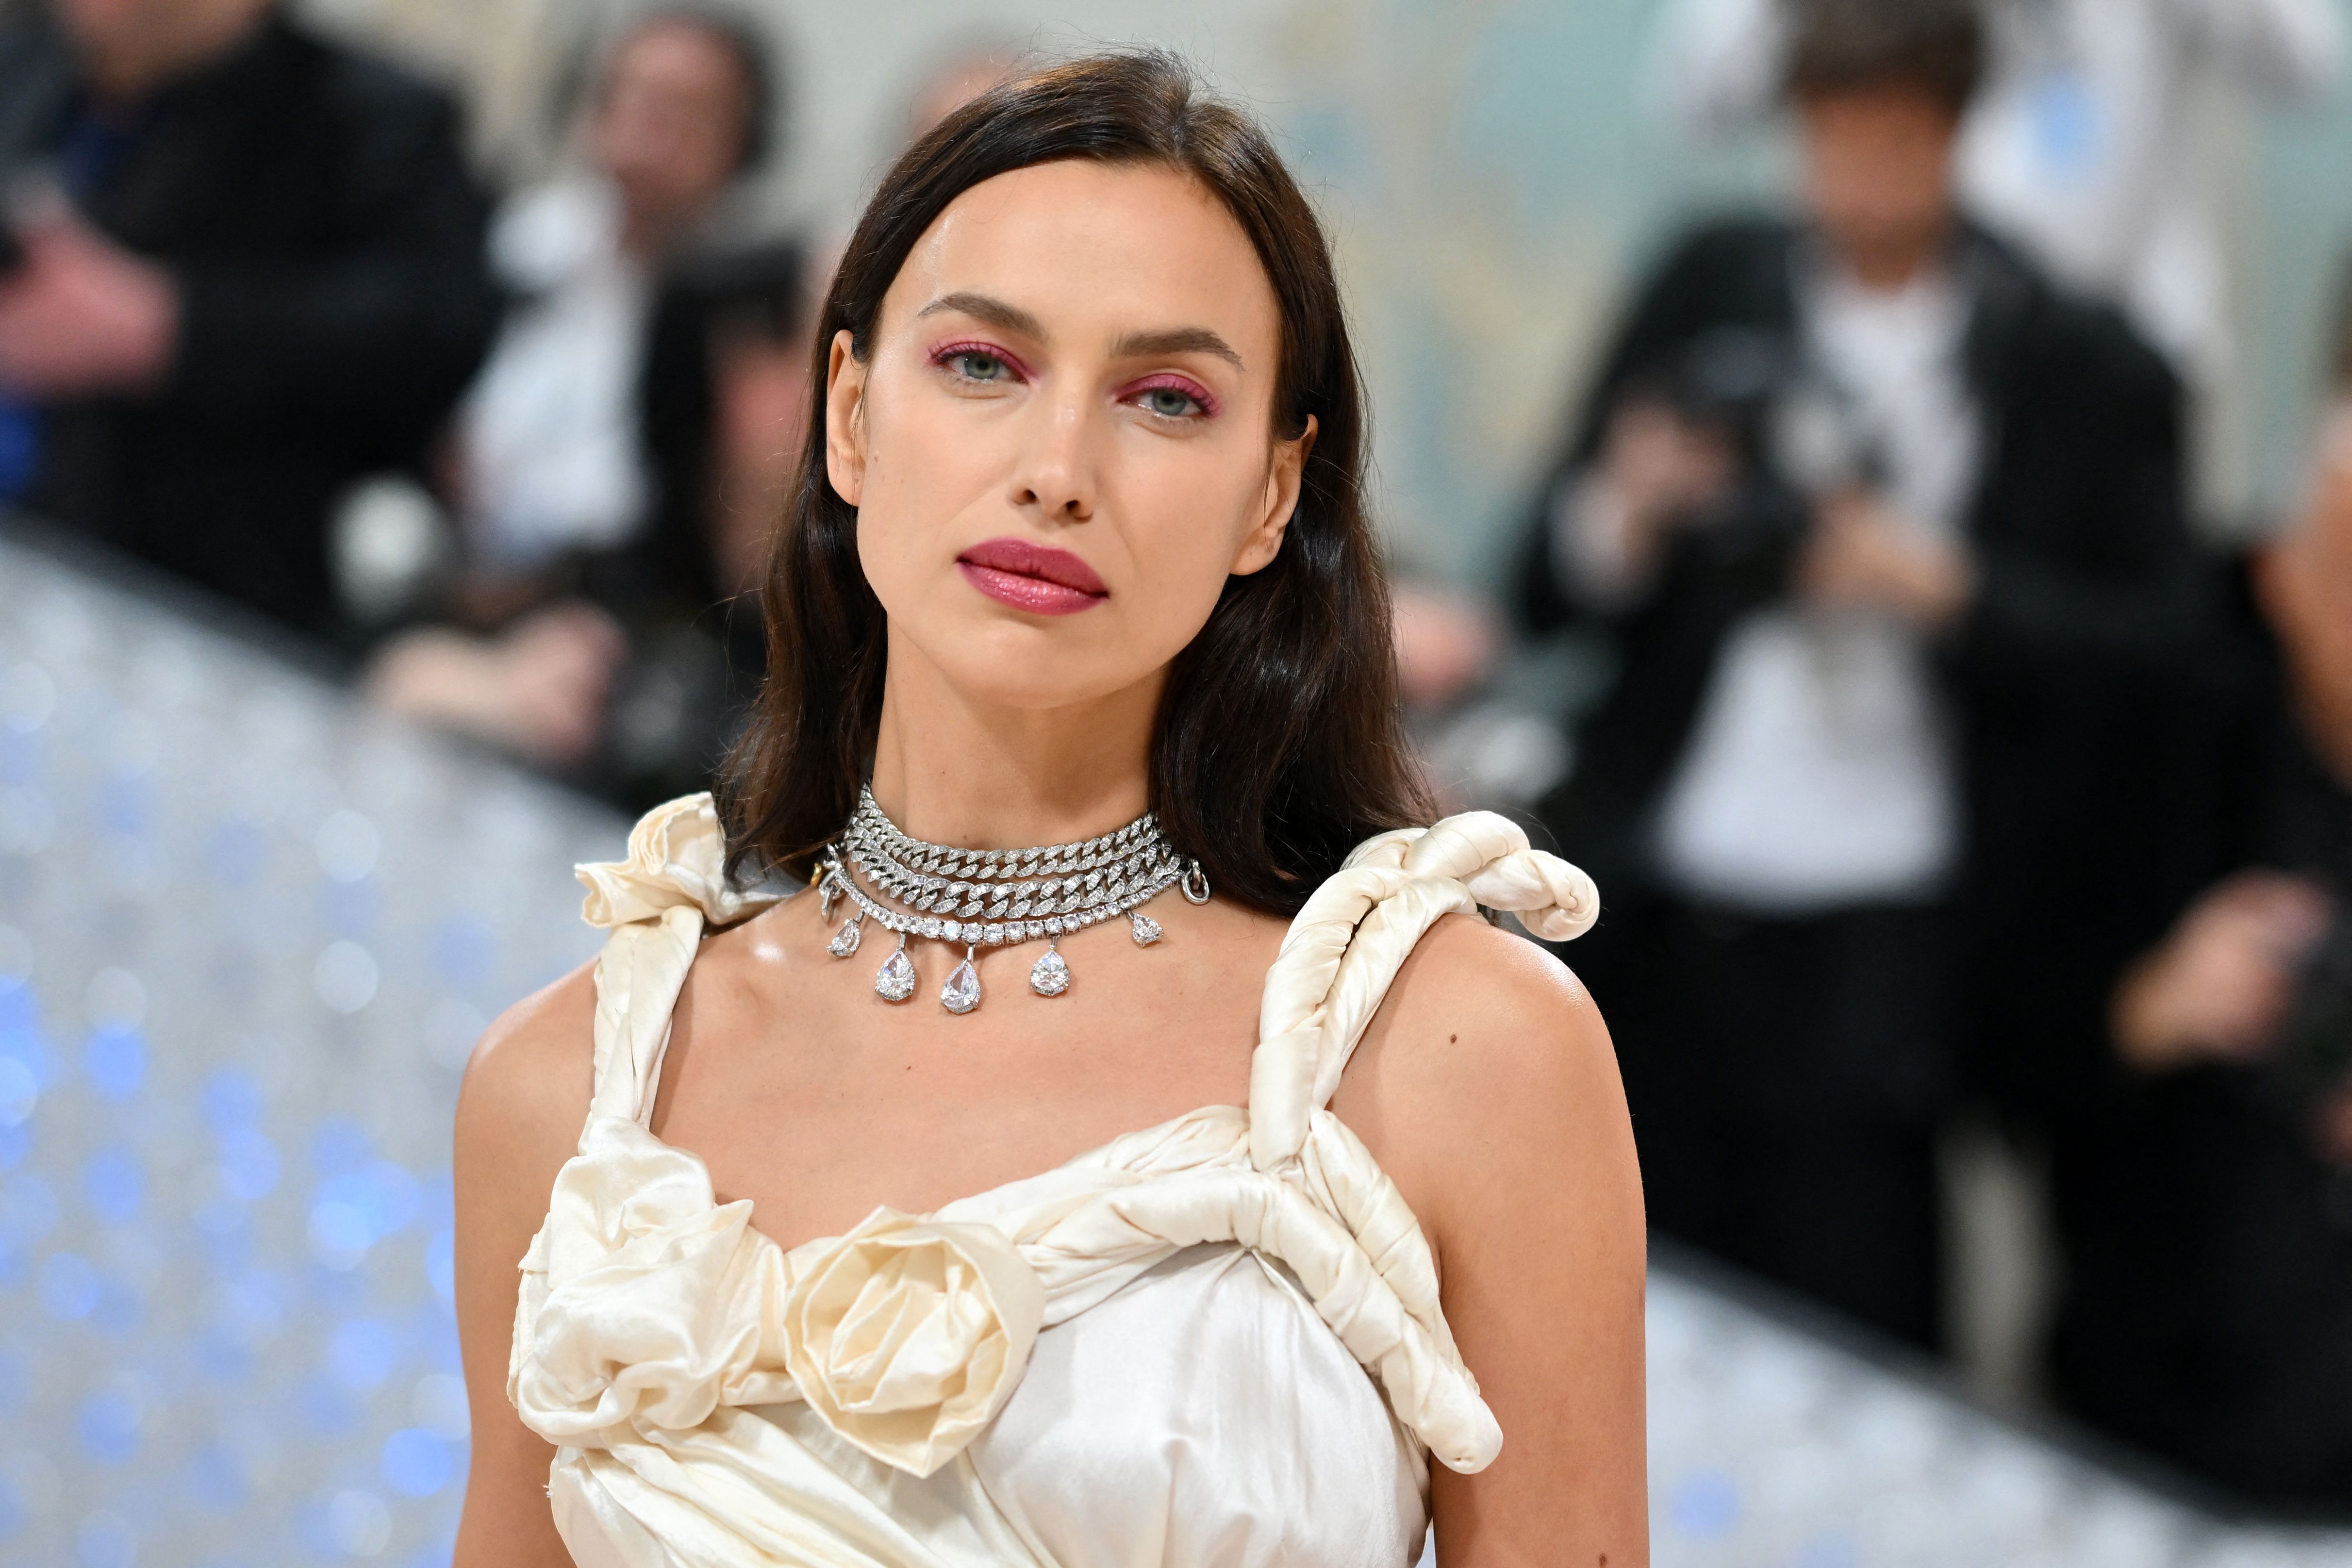 Irina Shayk at the 2023 Met Gala in New York, 2023 | Source: Getty Images